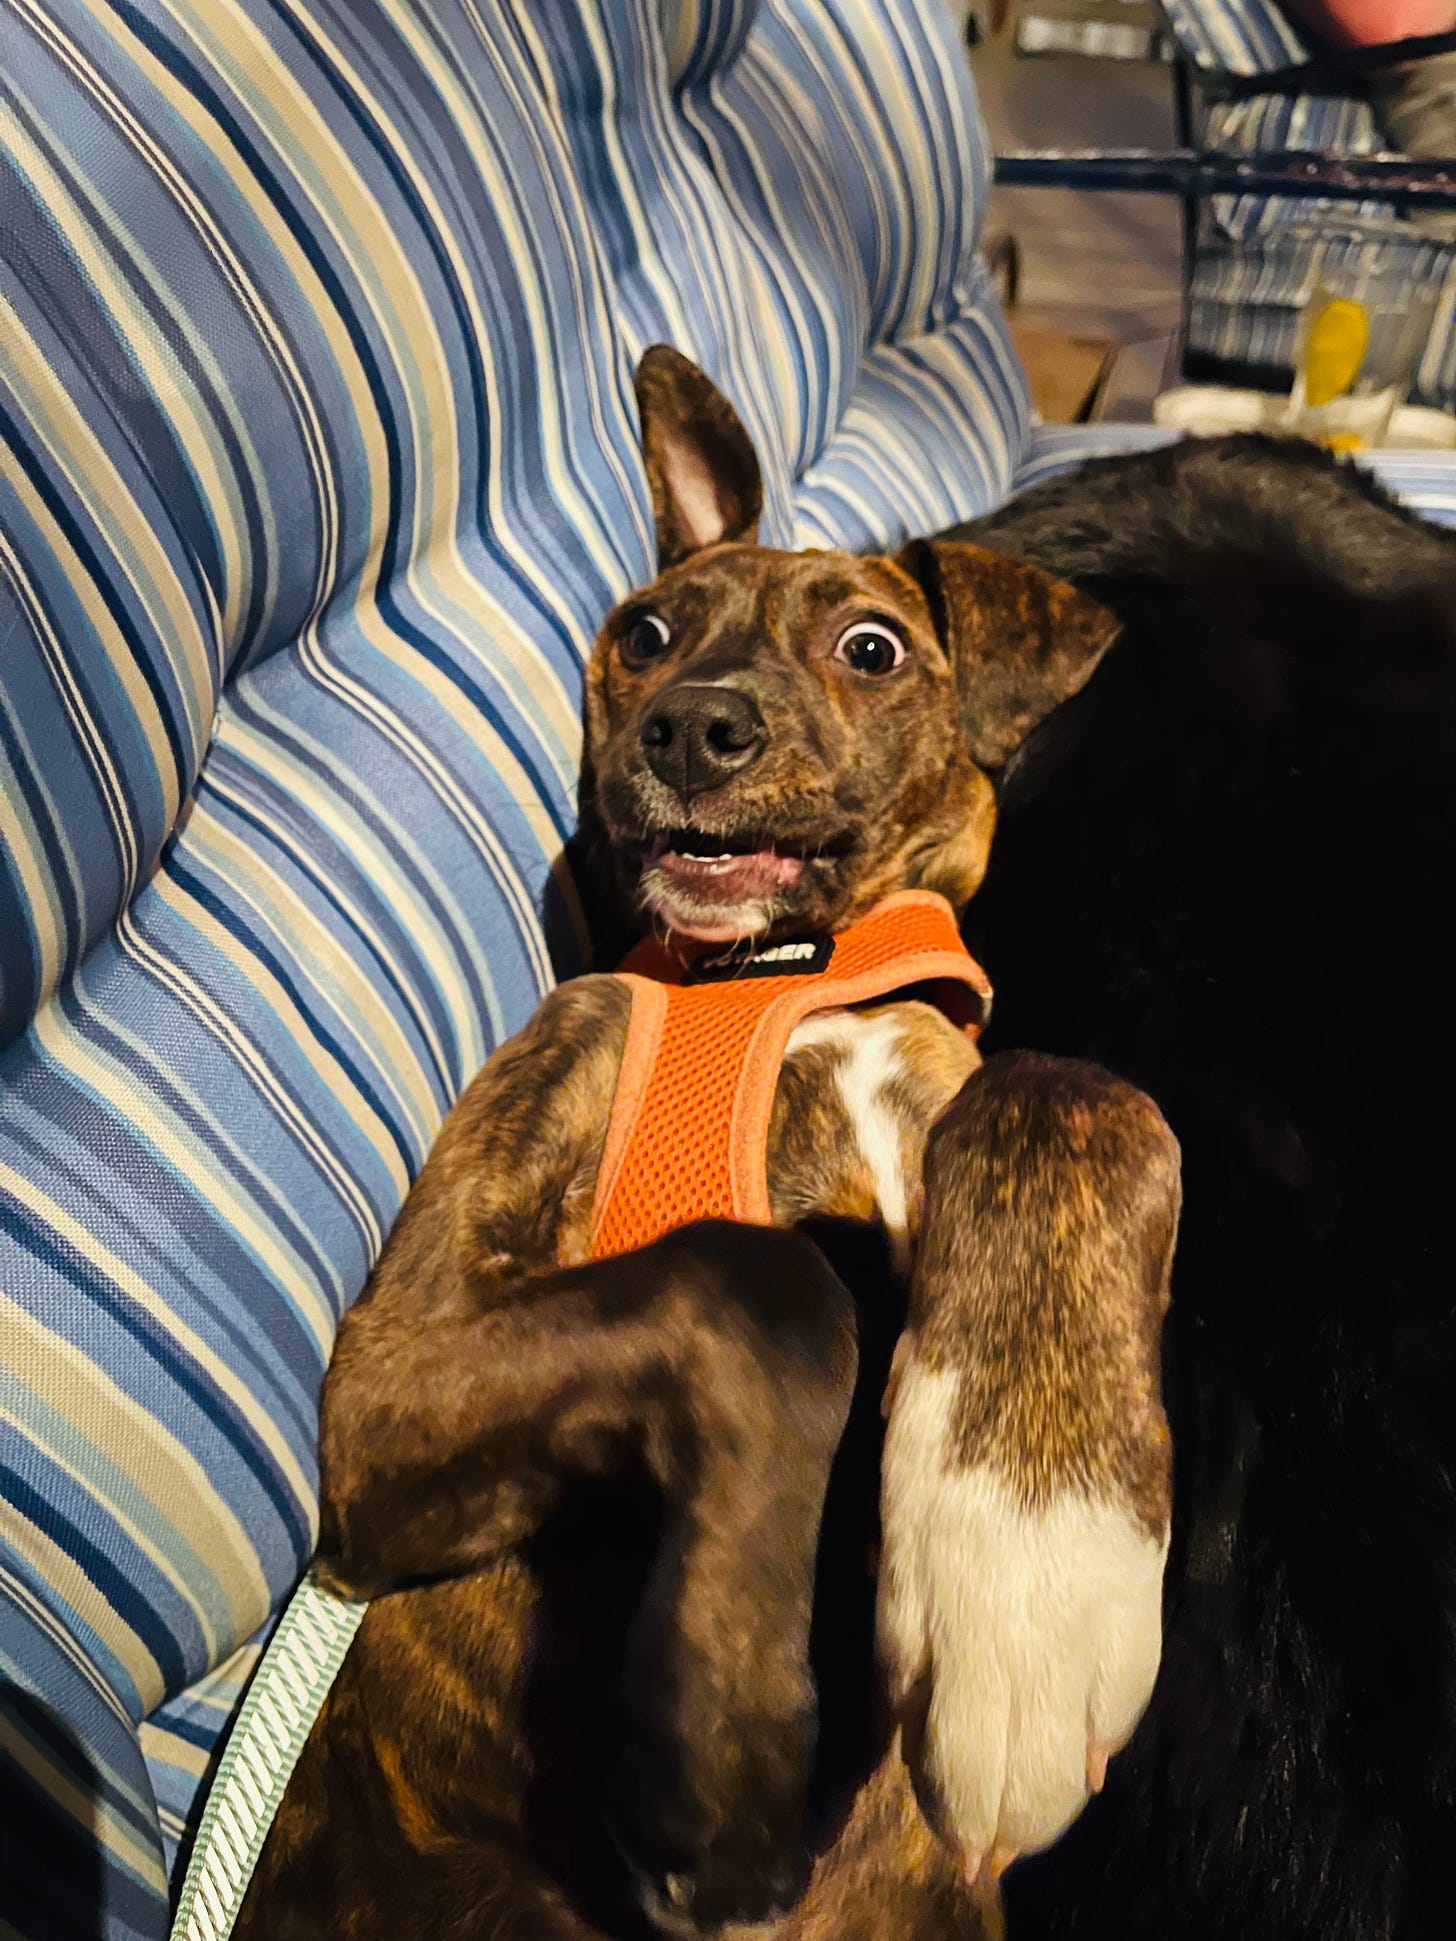 A surprised dog upside down on top of another dog on a couch, one ear is flopped up, eyes wide, mouth open